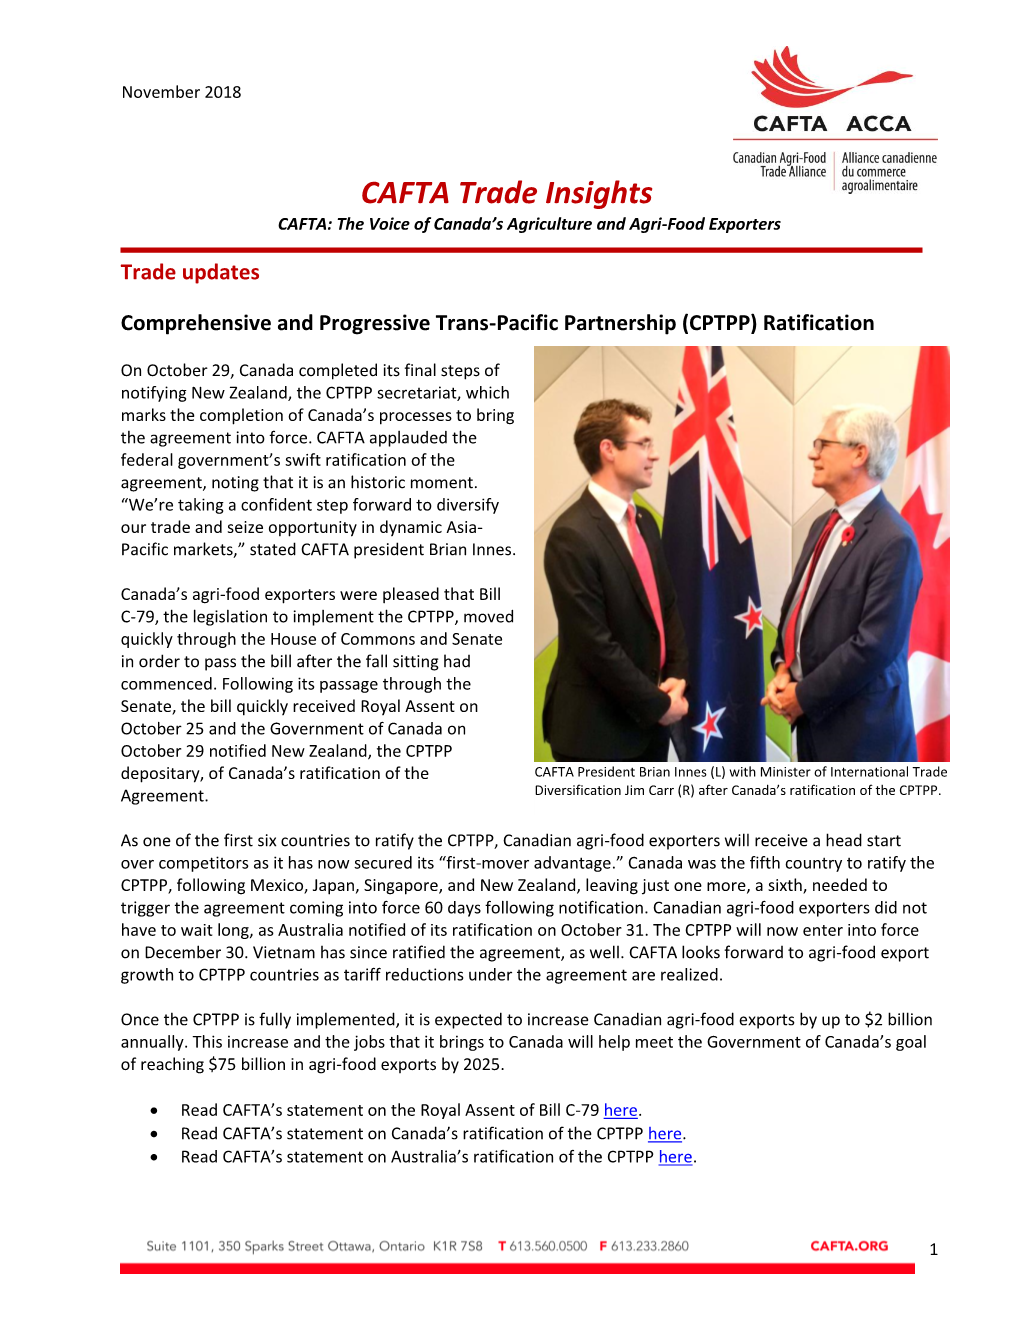 CAFTA Trade Insights CAFTA: the Voice of Canada’S Agriculture and Agri-Food Exporters